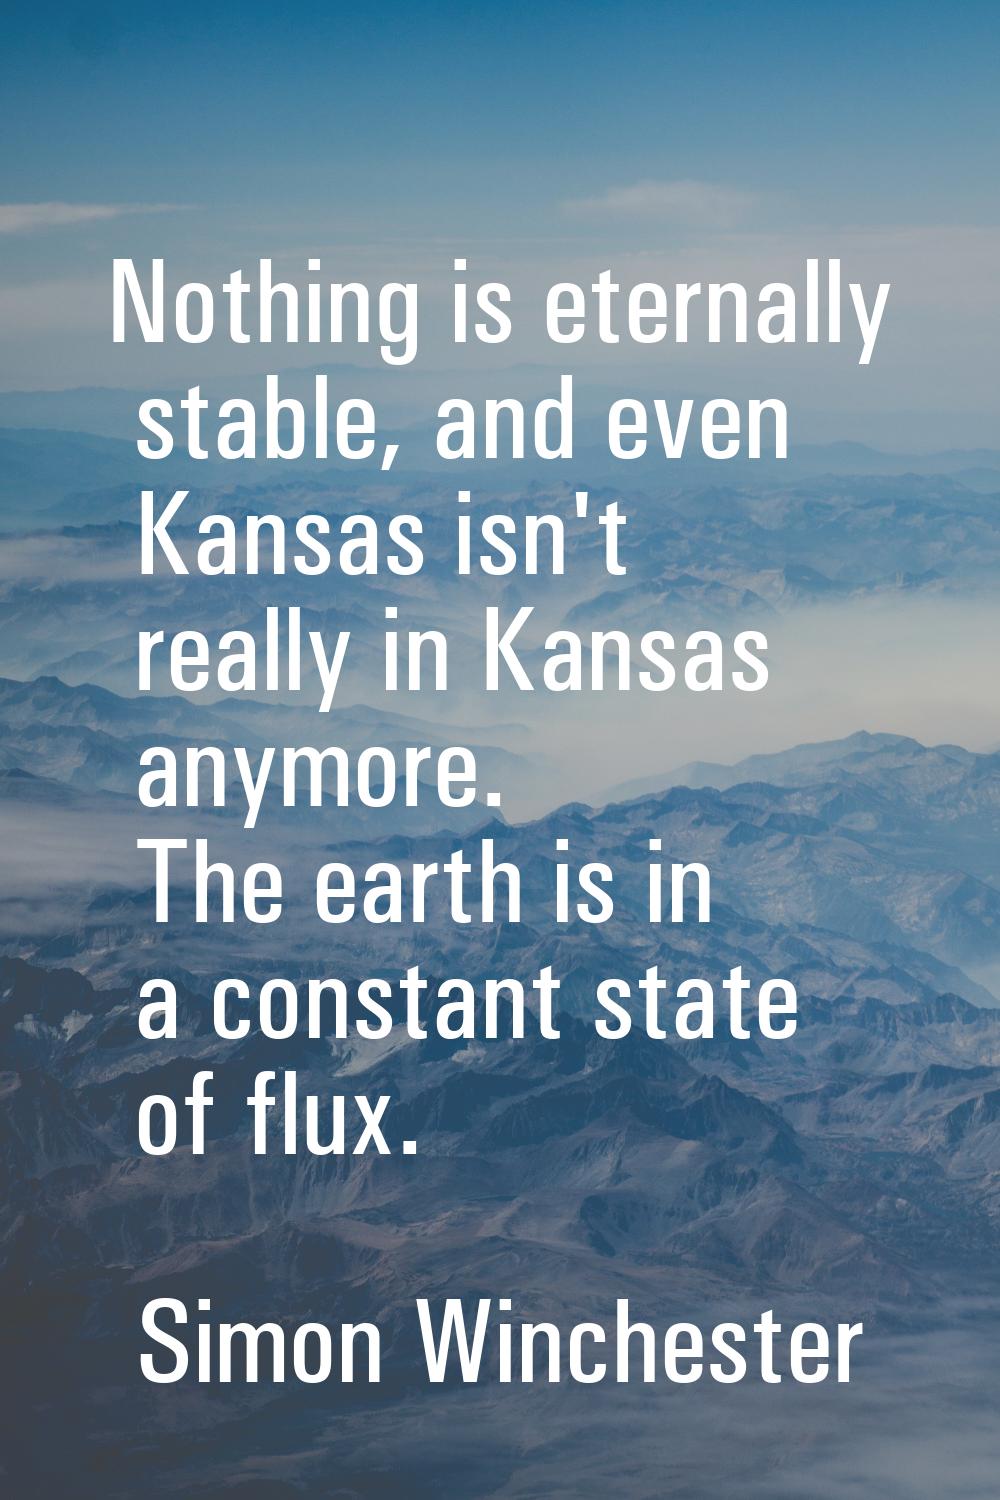 Nothing is eternally stable, and even Kansas isn't really in Kansas anymore. The earth is in a cons